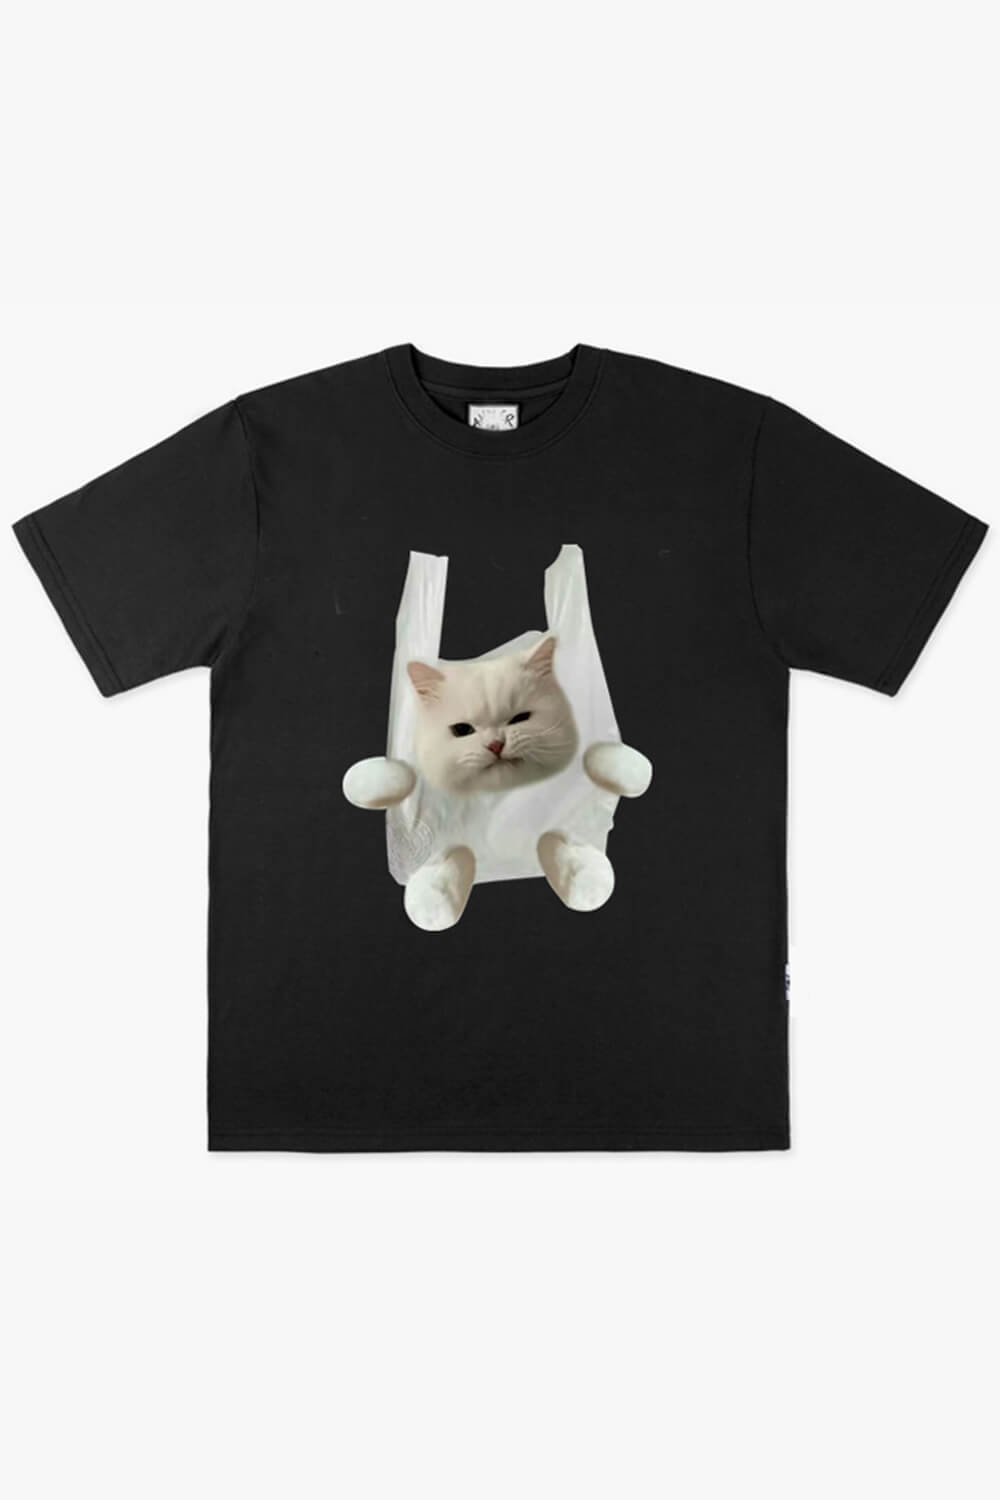 Angry Cat in Tote Bag T-Shirt